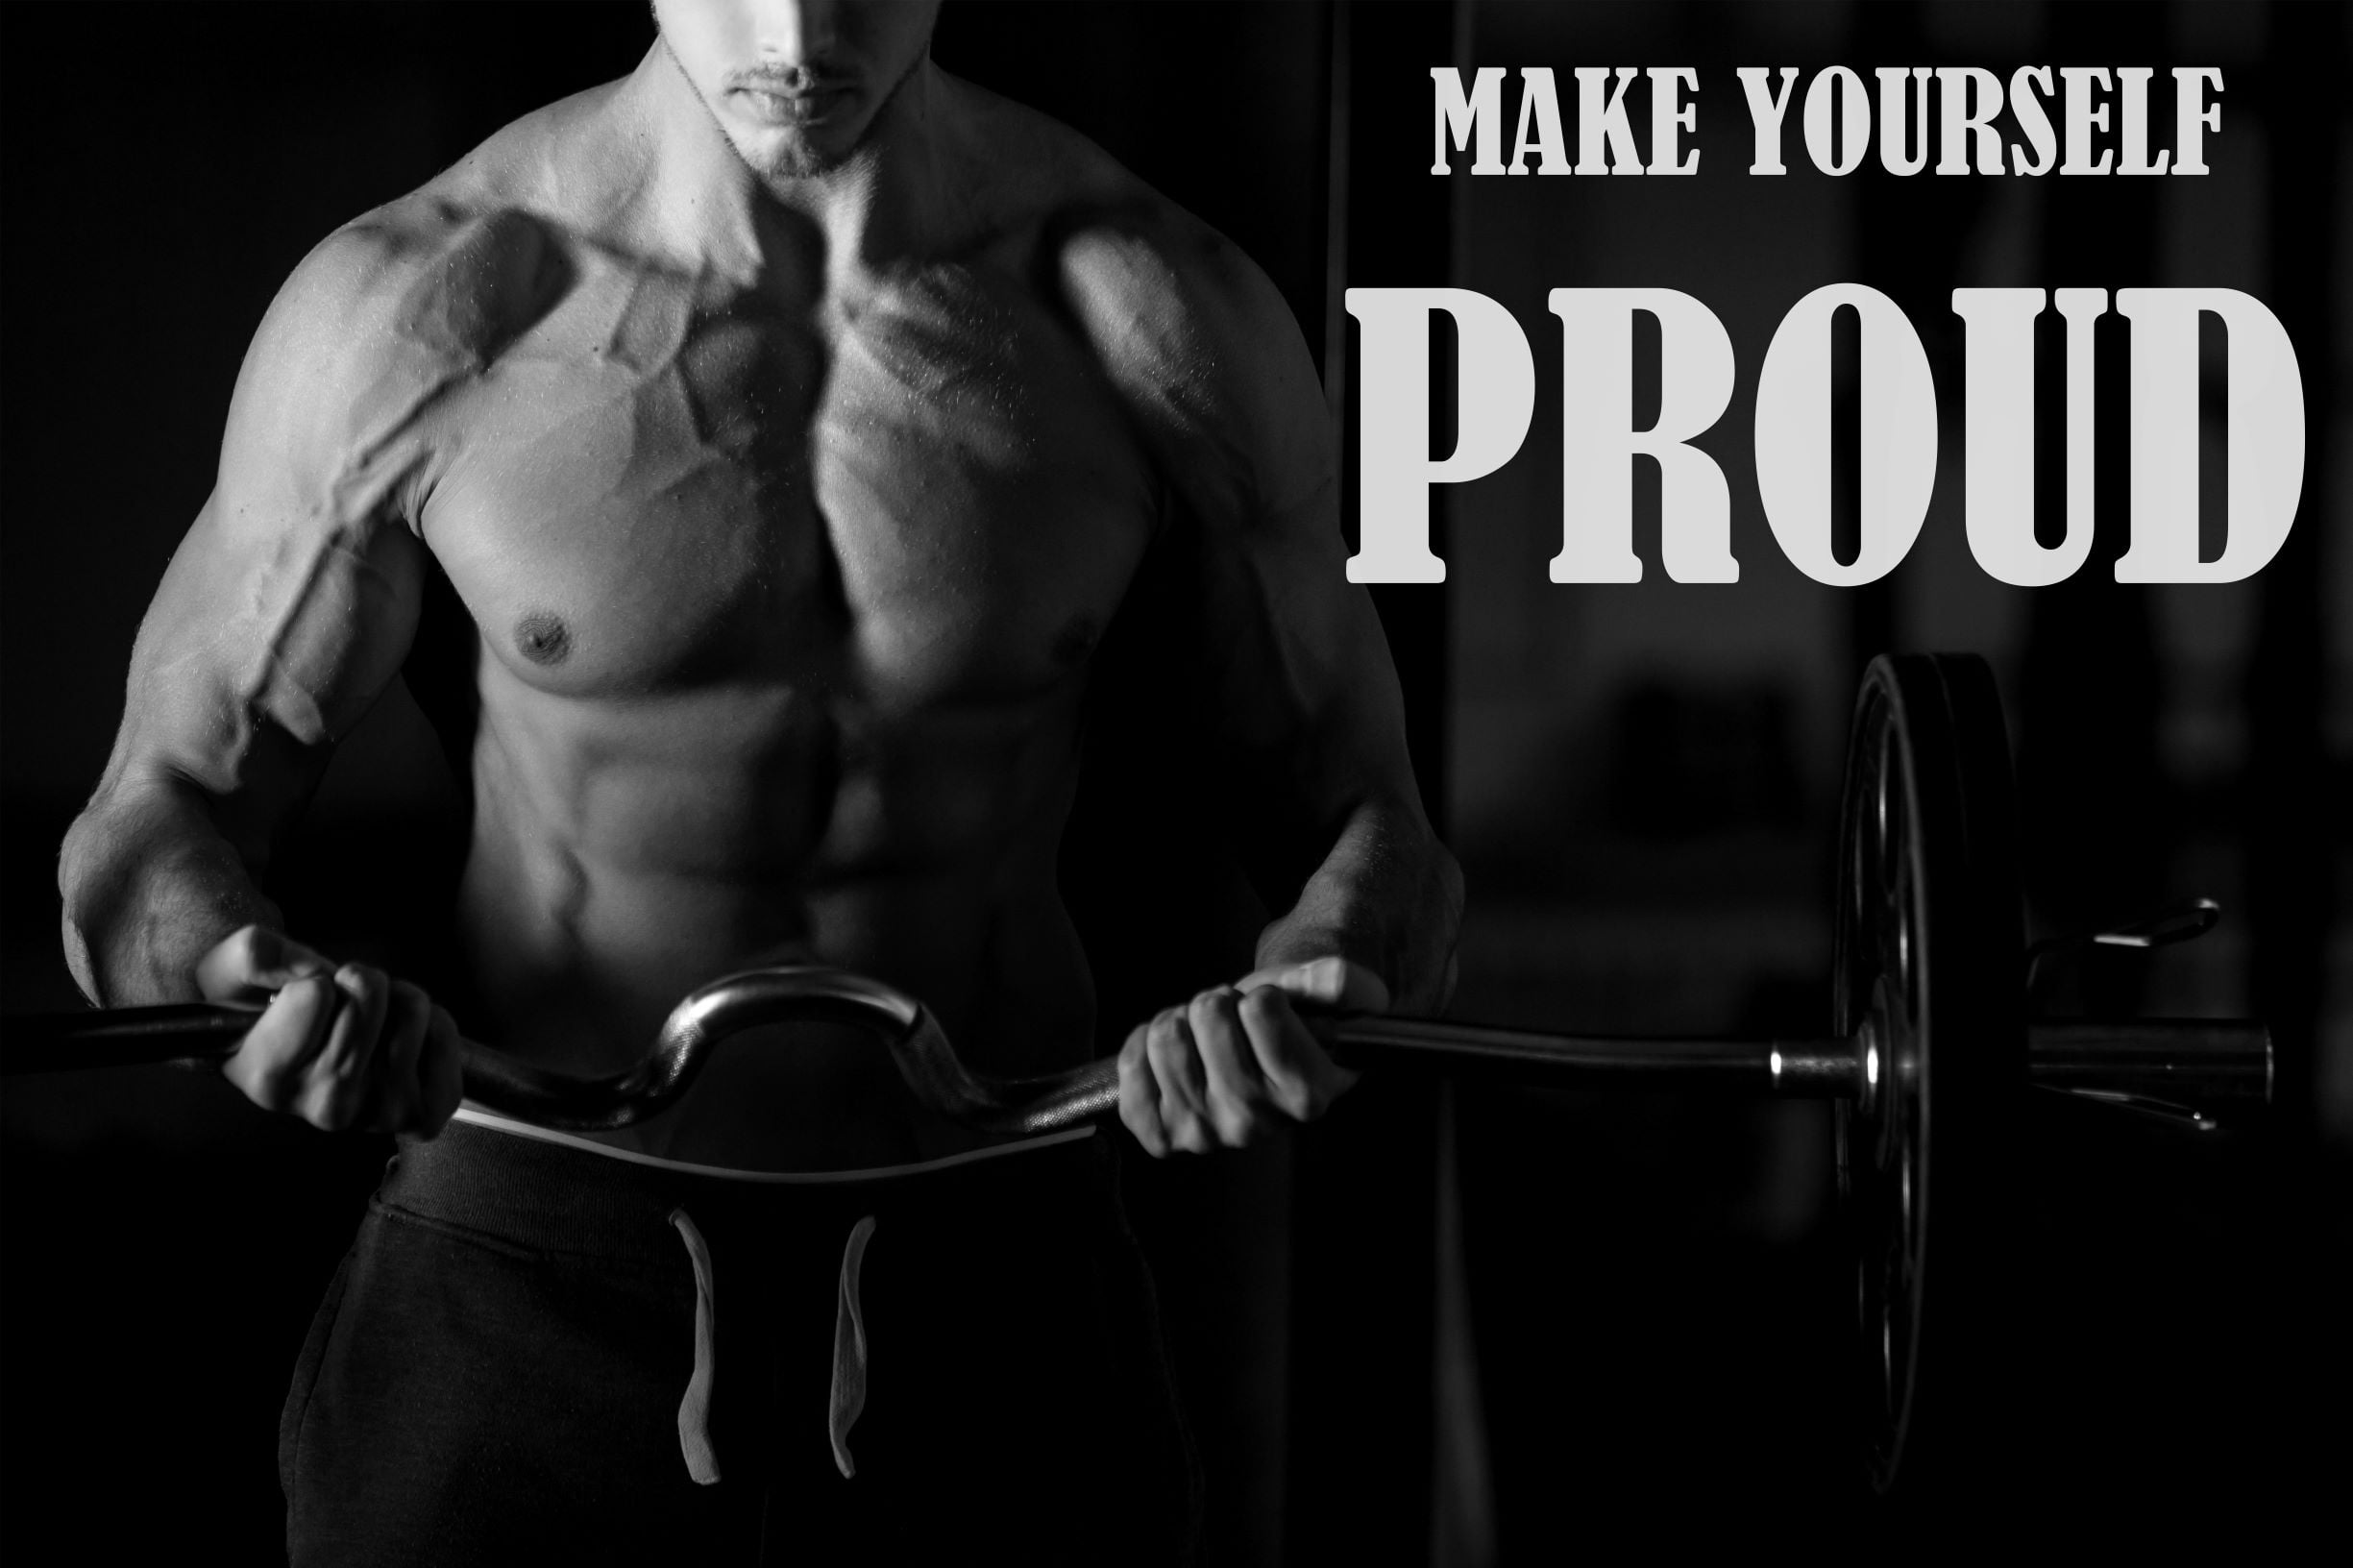 BODYBUILDING POSTER GYM MUSCLES WORKOUT FITNESS  WALL ART PICTURE PRINT 